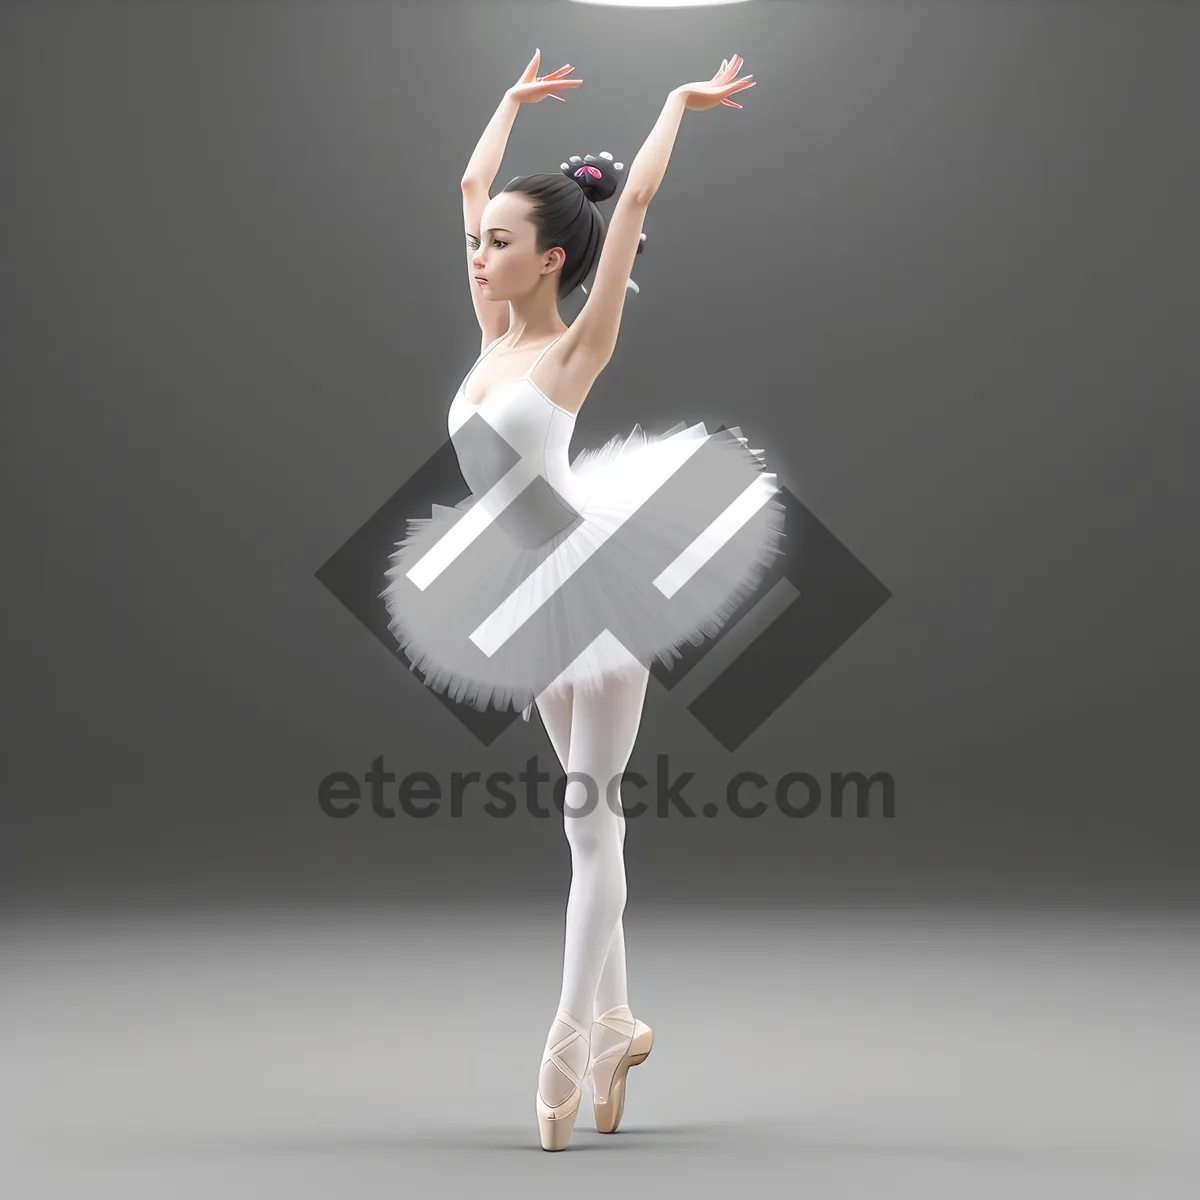 Picture of Elegant Ballerina gracefully performs a captivating dance.